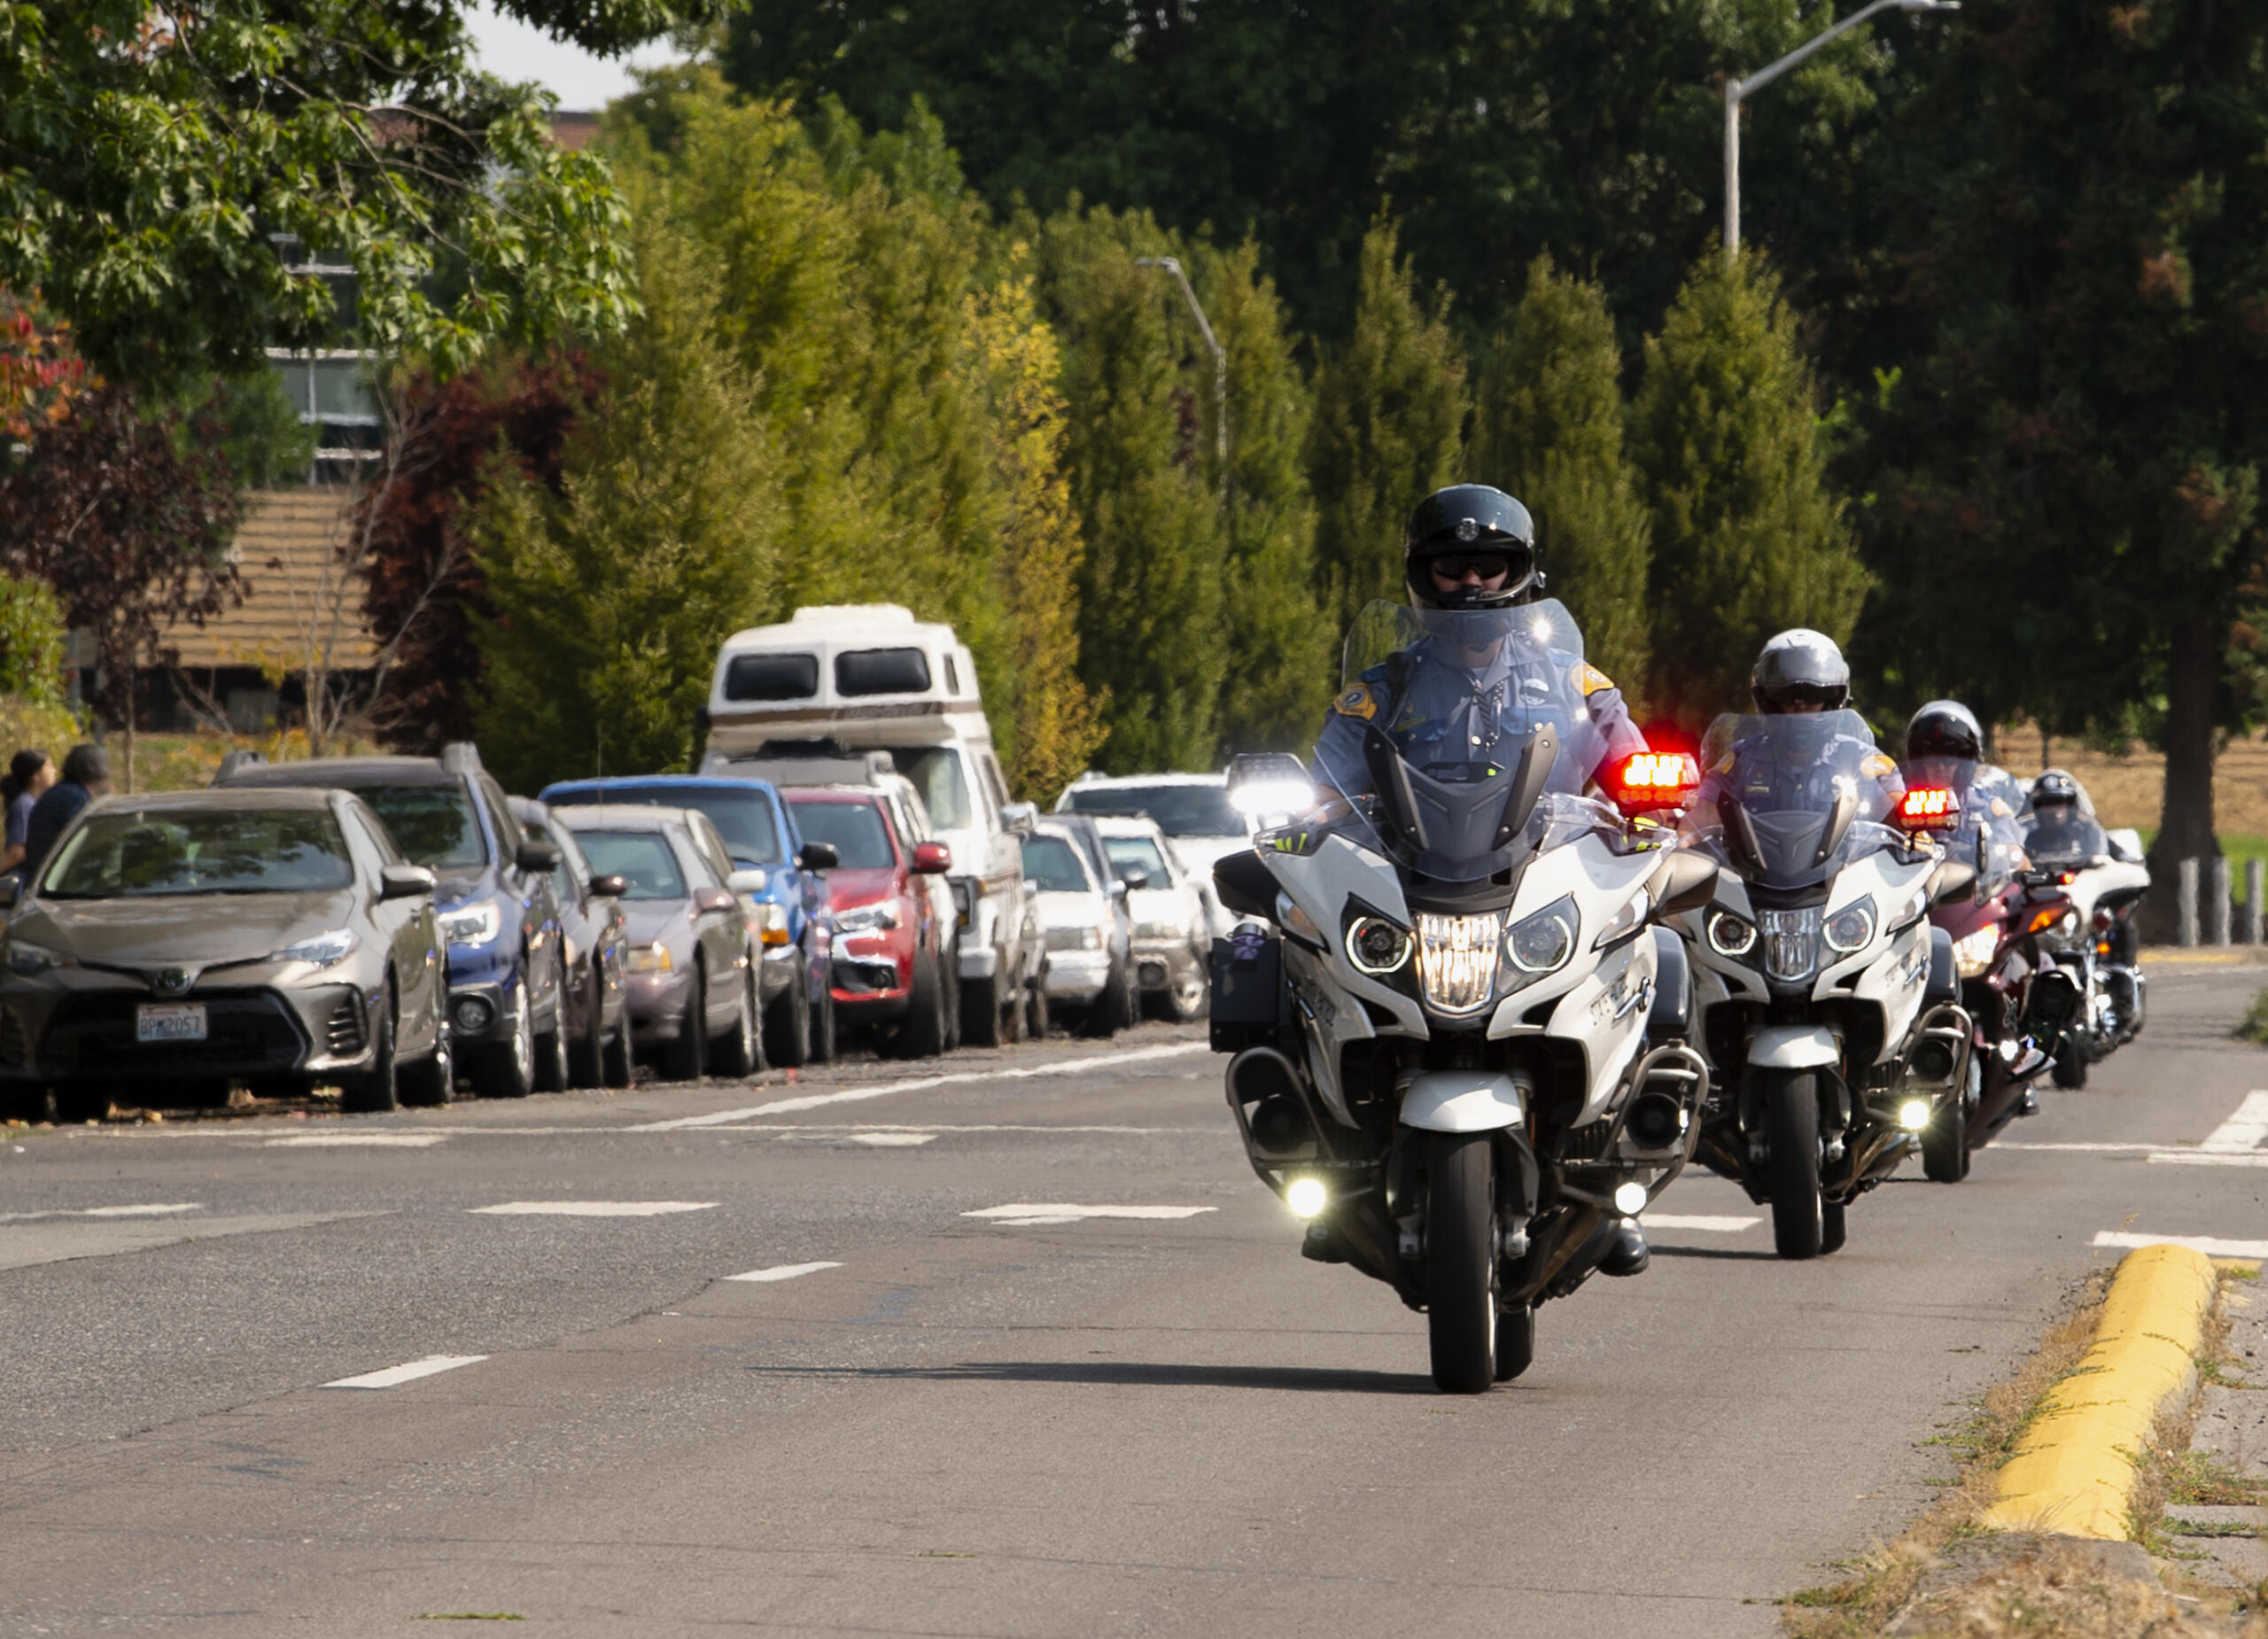 Officers on motorcycles start the procession preceding the funeral of Clark County Sheriff's Sgt. Jeremy Brown on Tuesday, Aug. 3, 2021, at Clark College. Brown was fatally shot on July 23 while conducting surveillance on a group of people at an east Vancouver apartment complex. Hundreds of law enforcement vehicles took place in the procession up I-5 to ilani casino in La Center. It took 15 minutes for the hundreds of vehicles to vacate the Clark College lot.